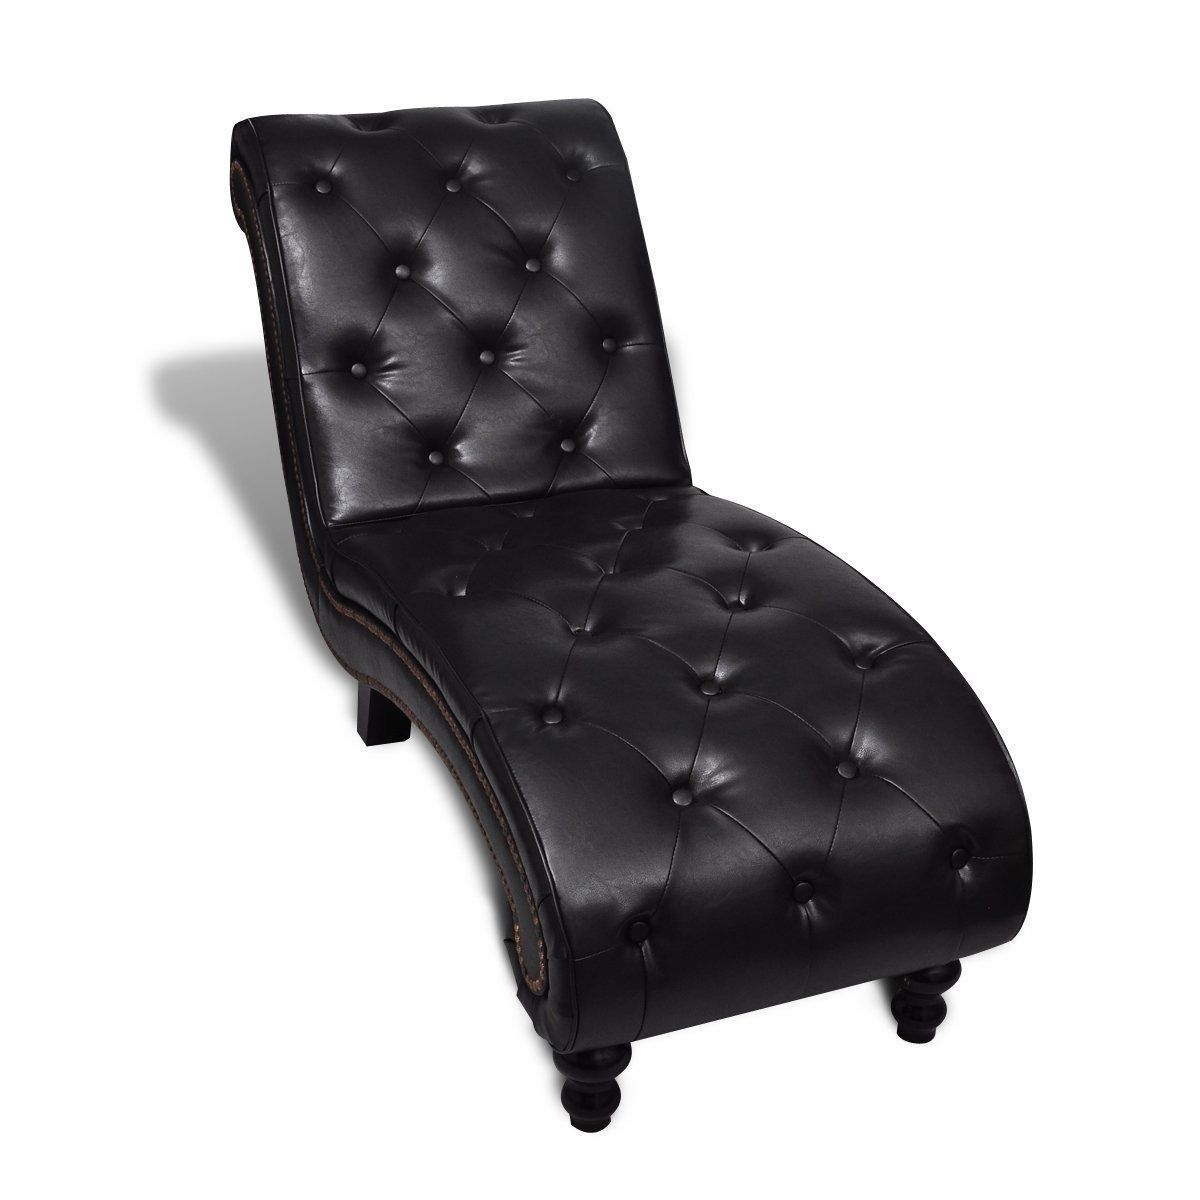 Well Known Black Leather Chaise Lounge Chairs For Black Tufted Faux Leather Chaise Lounge Chair For Bedroom (View 5 of 15)